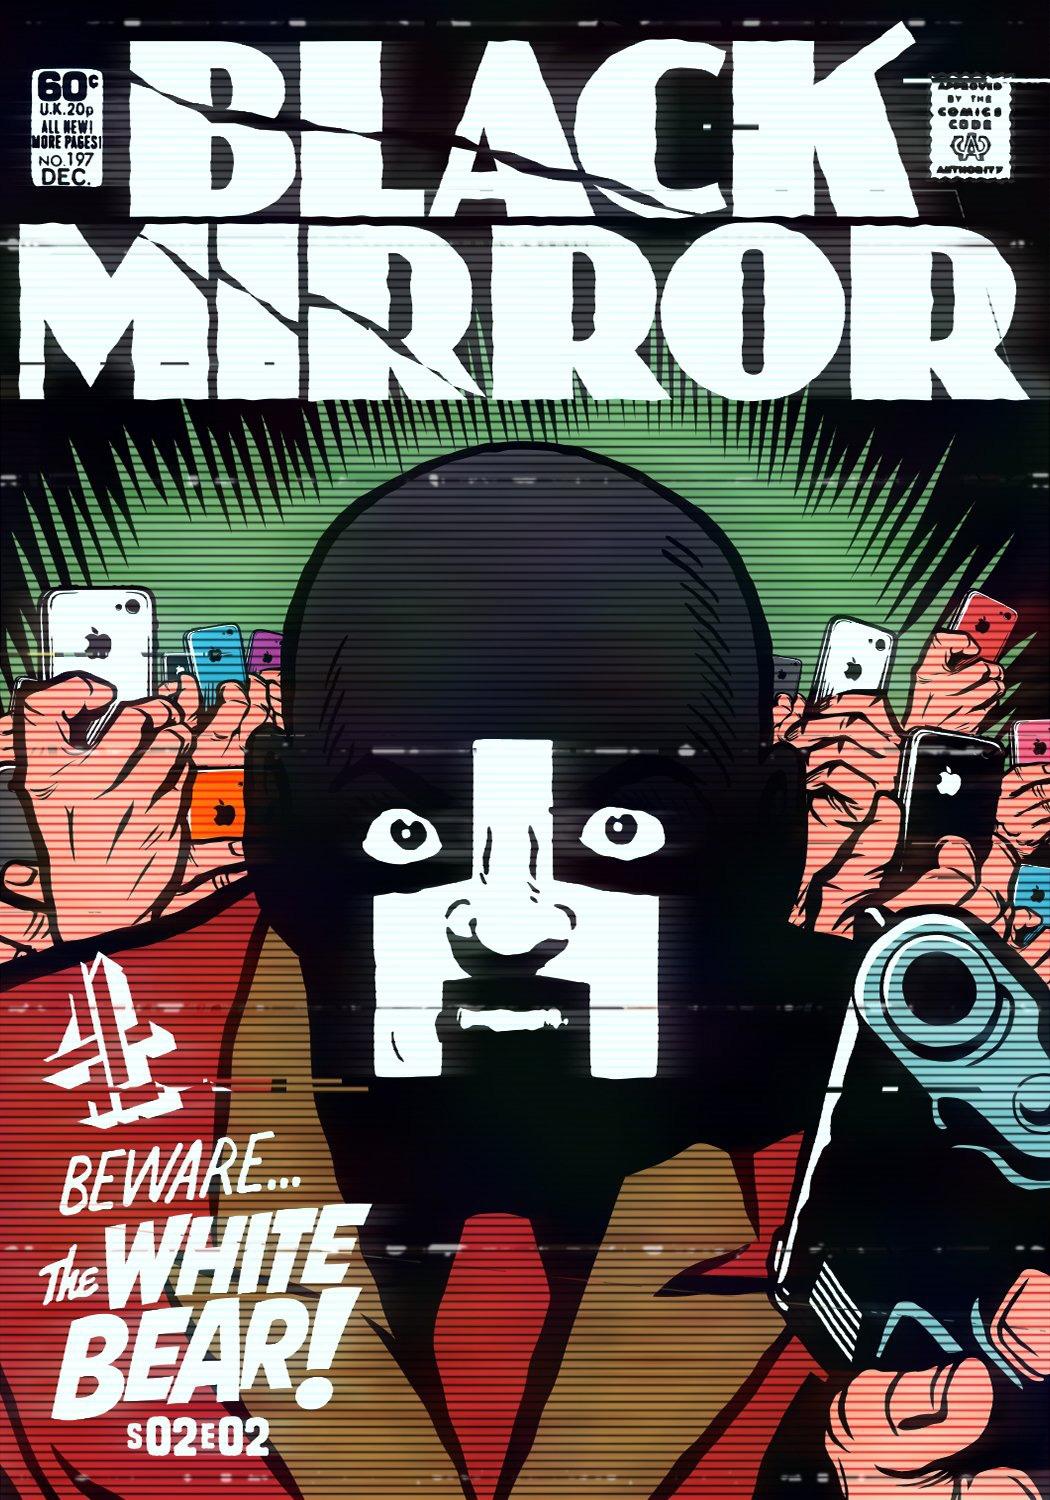 More 'Black Mirror' episodes turned into Golden Age comic